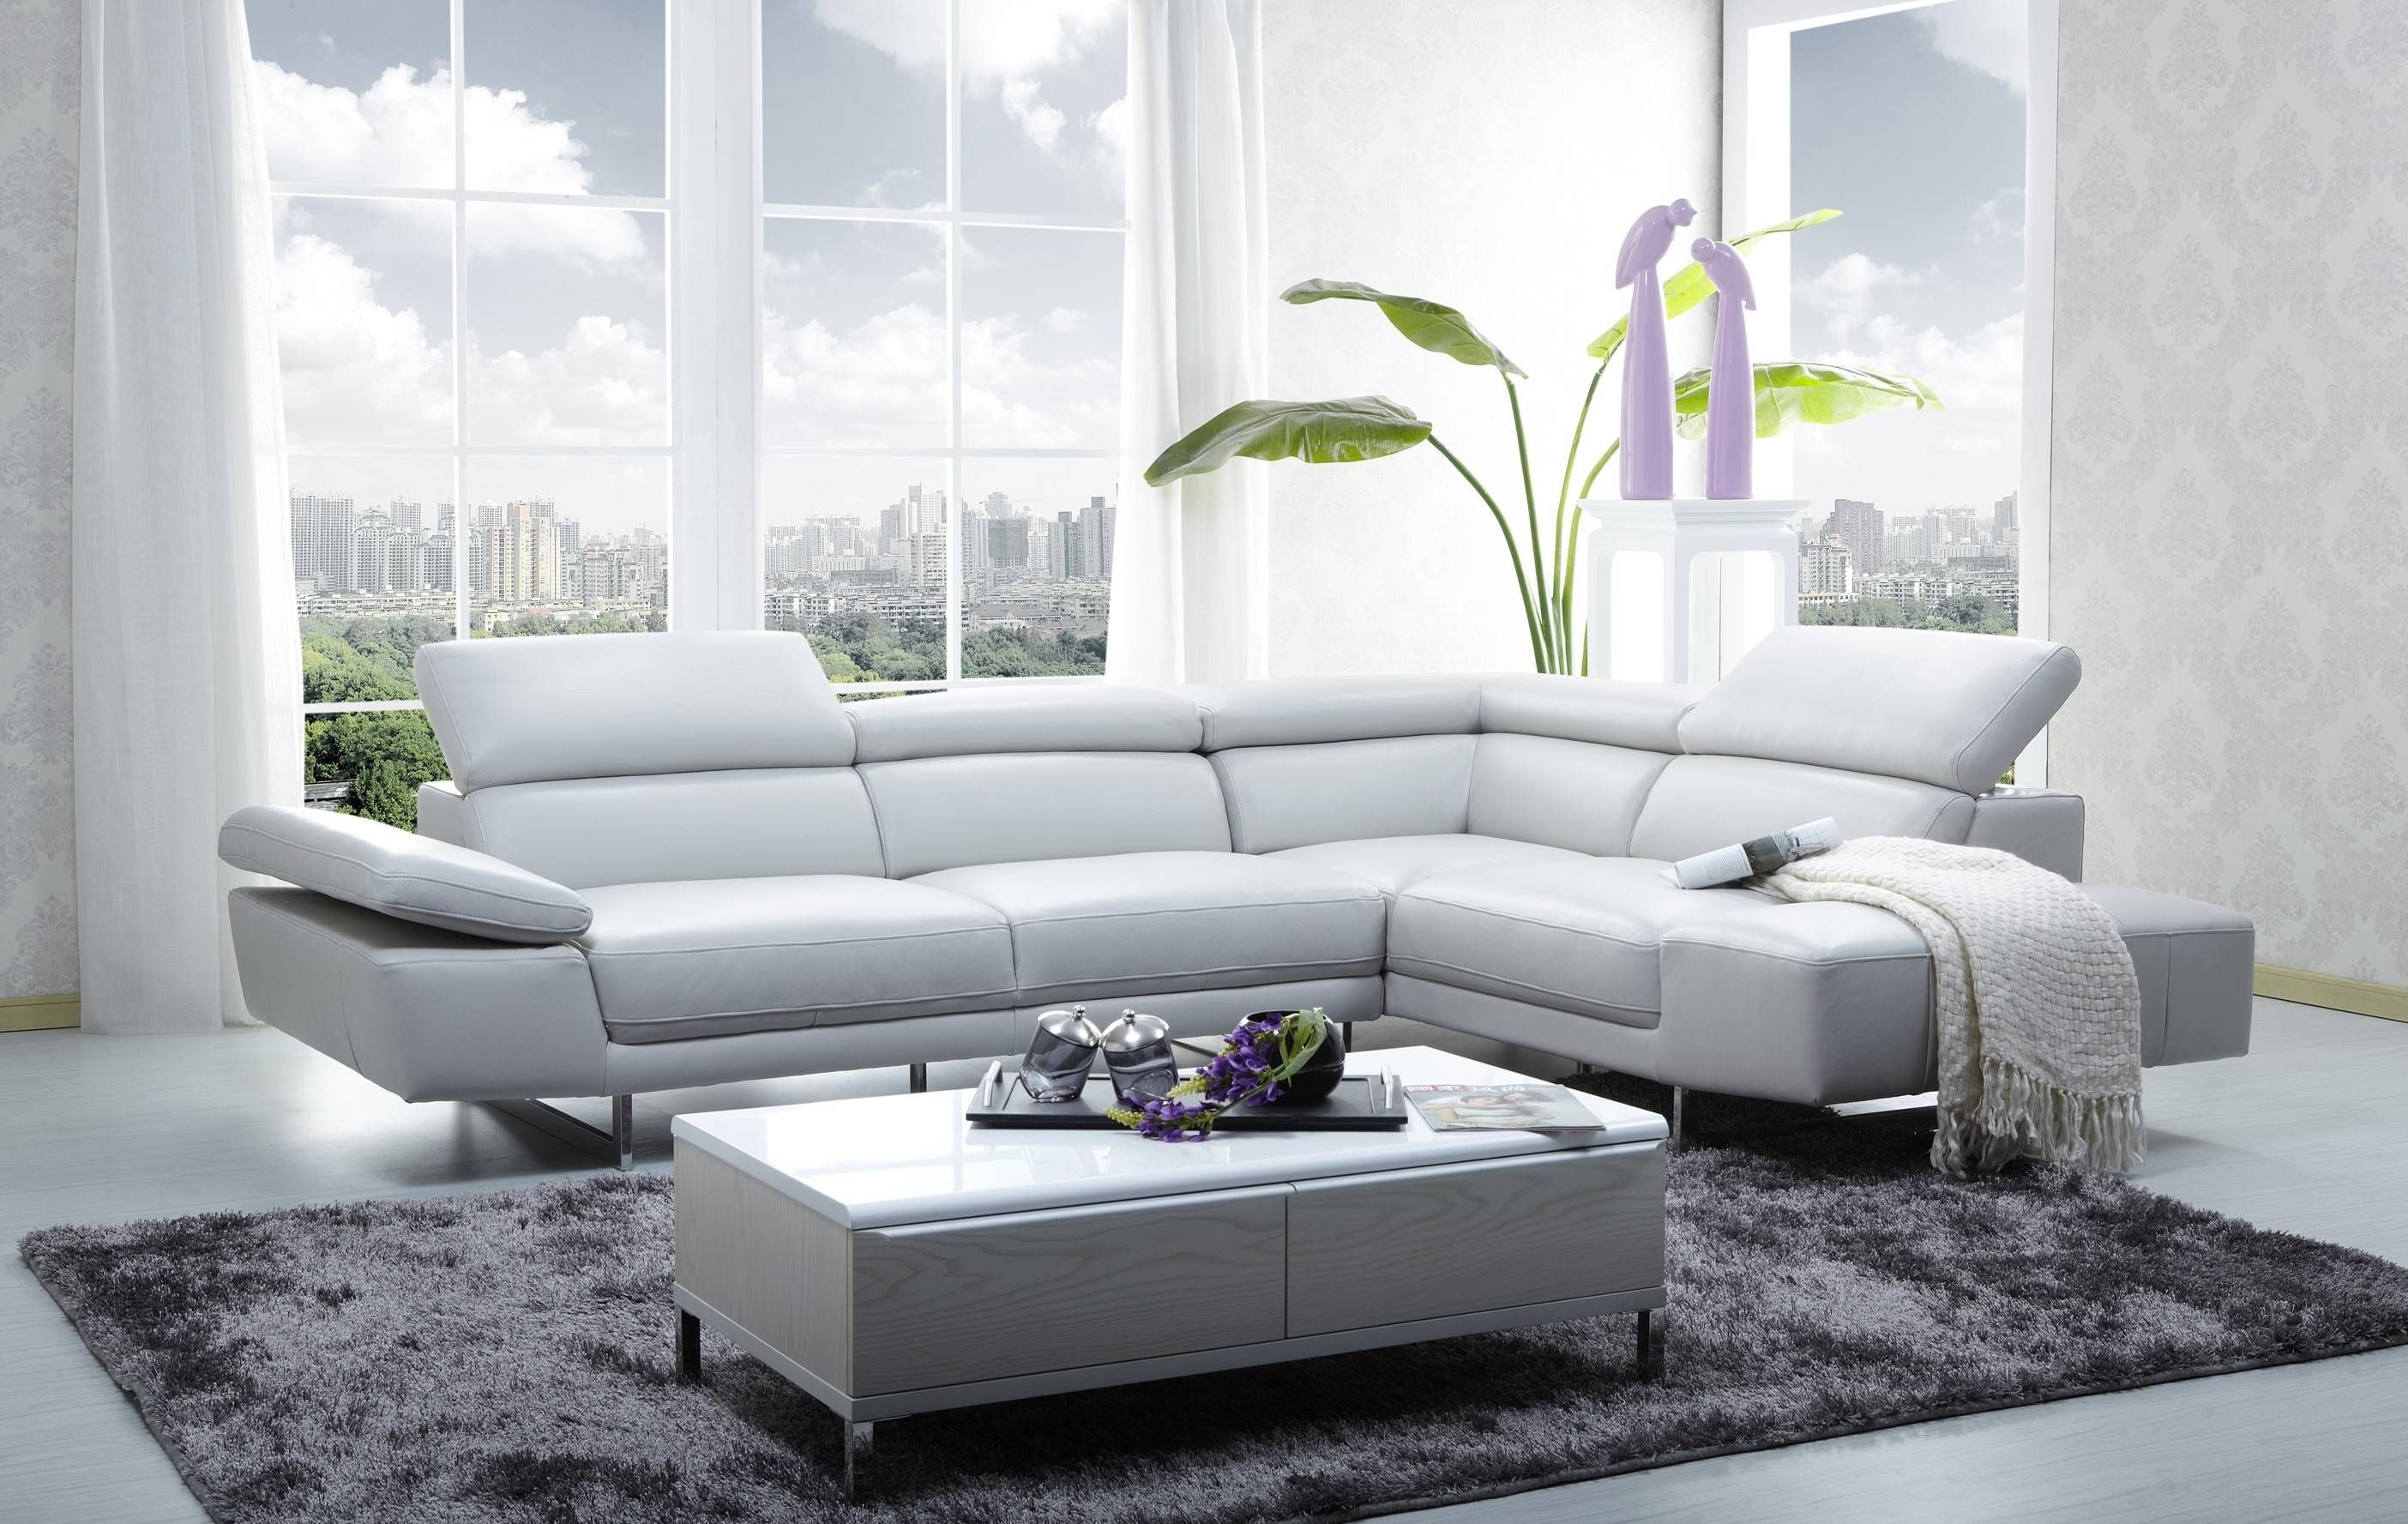 1717 Italian Leather Modern Sectional Sofa Intended For Leather Modern Sectional Sofas (View 12 of 15)